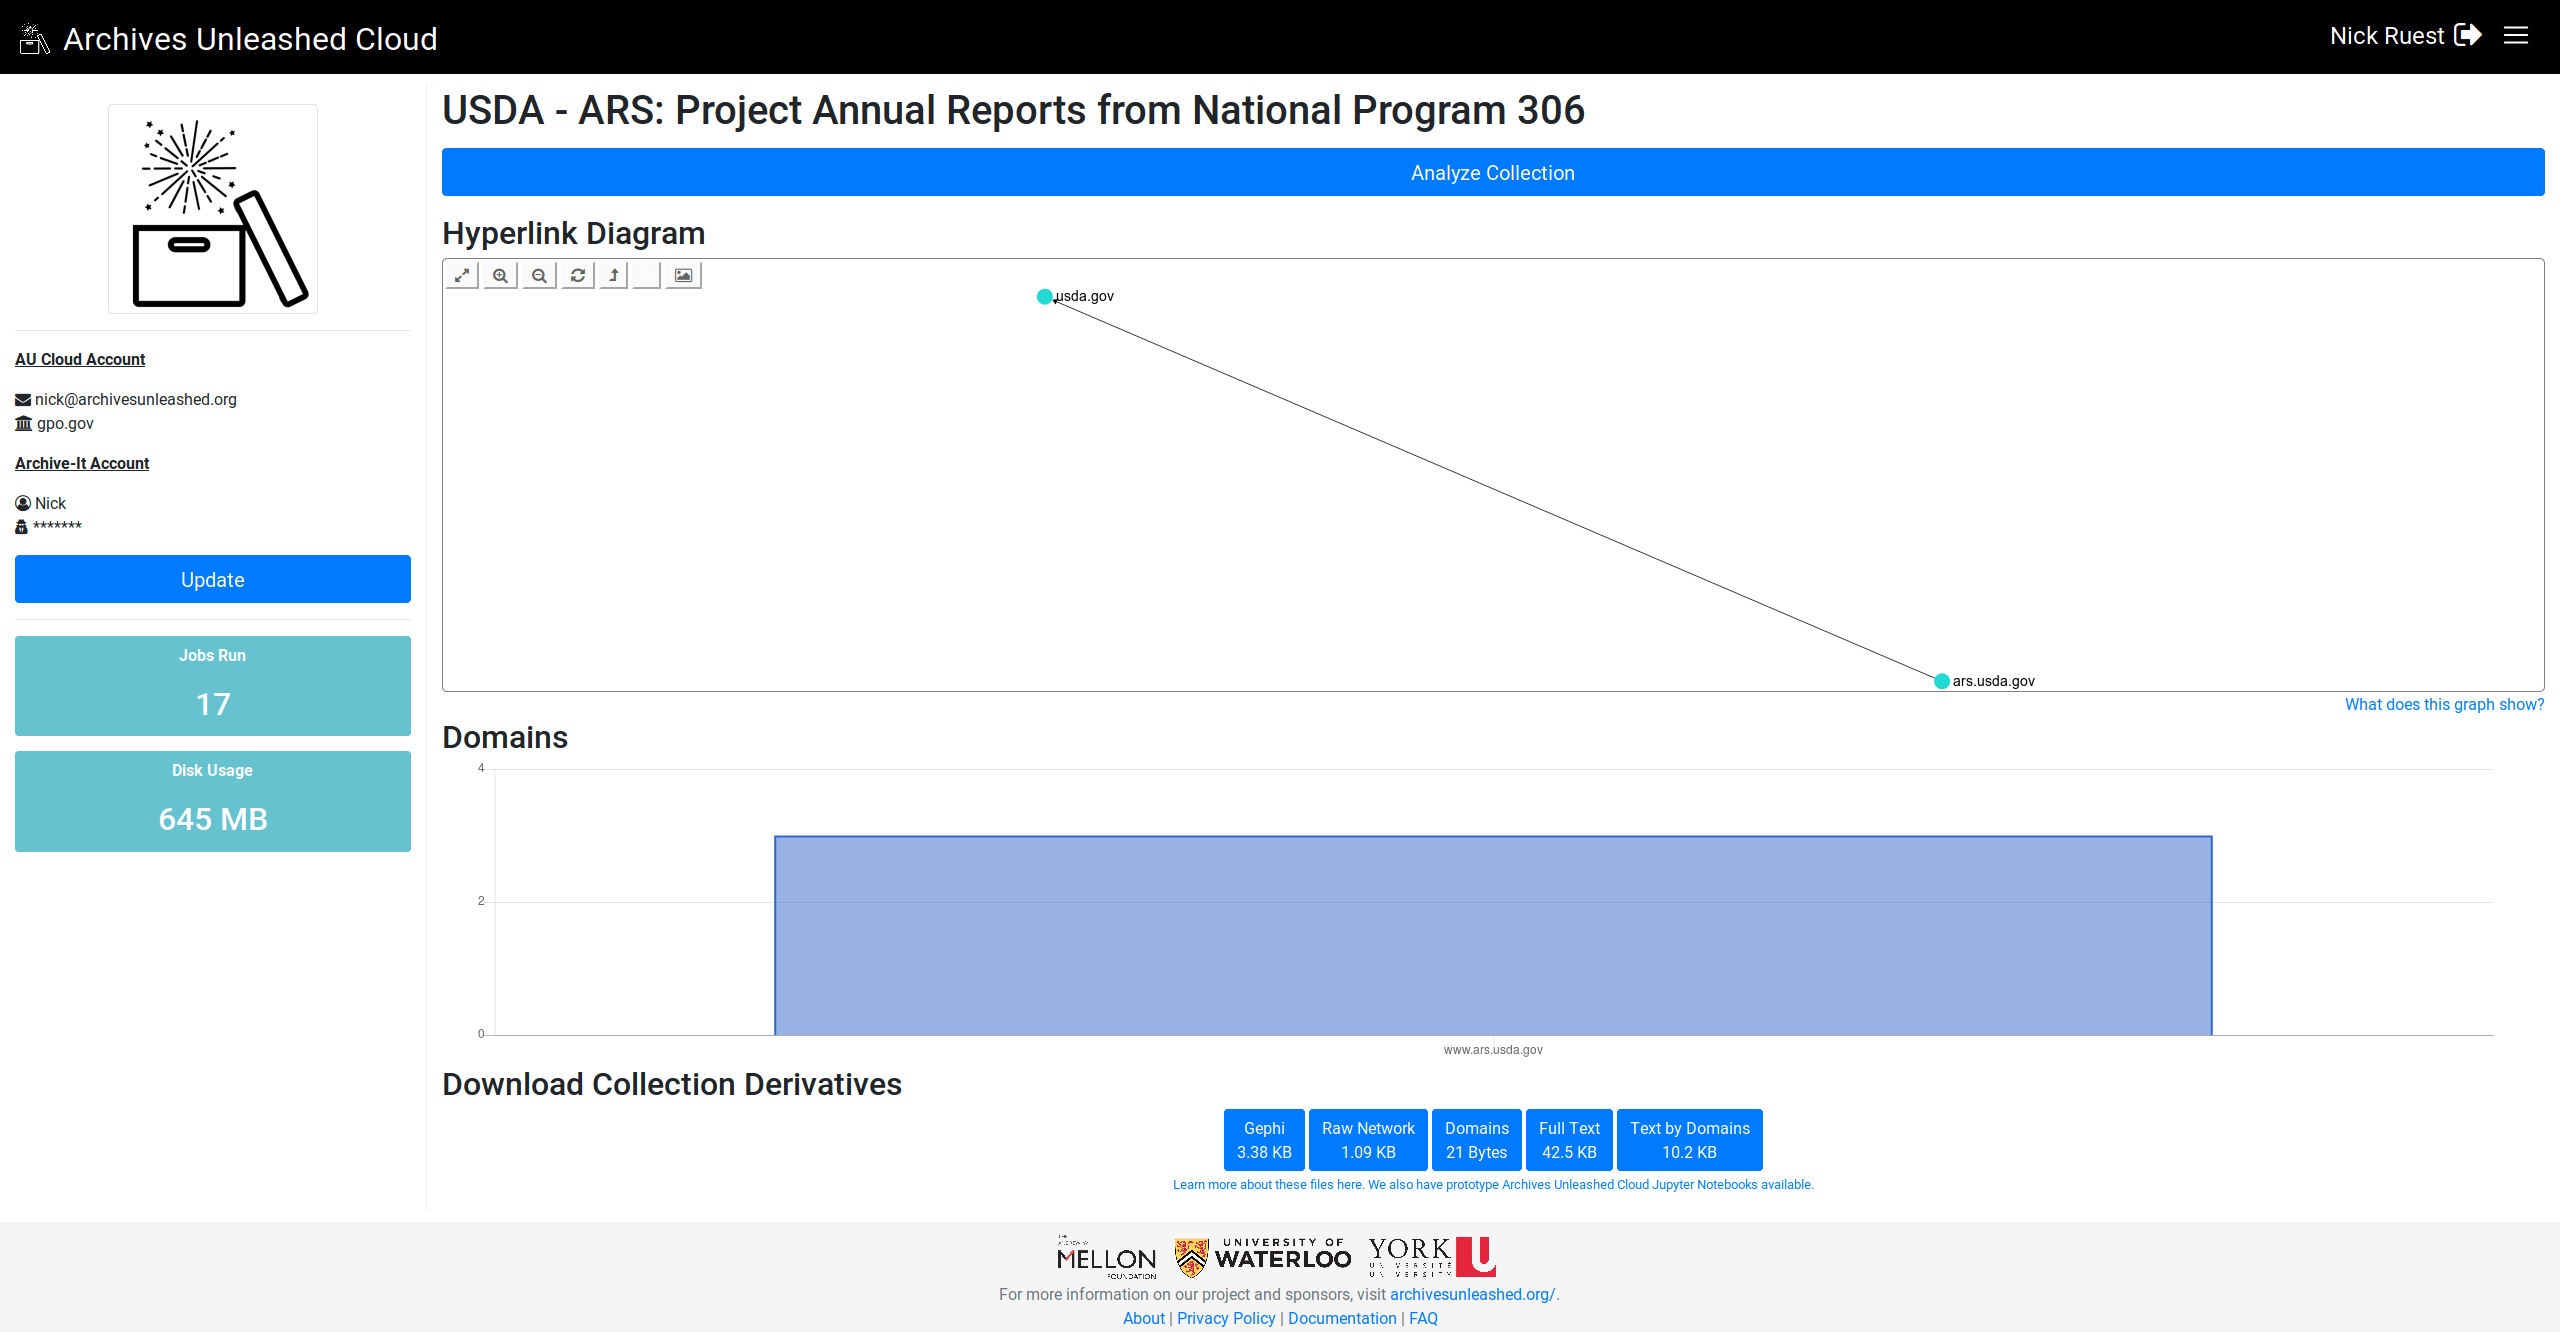 Screenshot_2019-05-02 USDA - ARS Project Annual Reports from National Program 306 Archives Unleashed